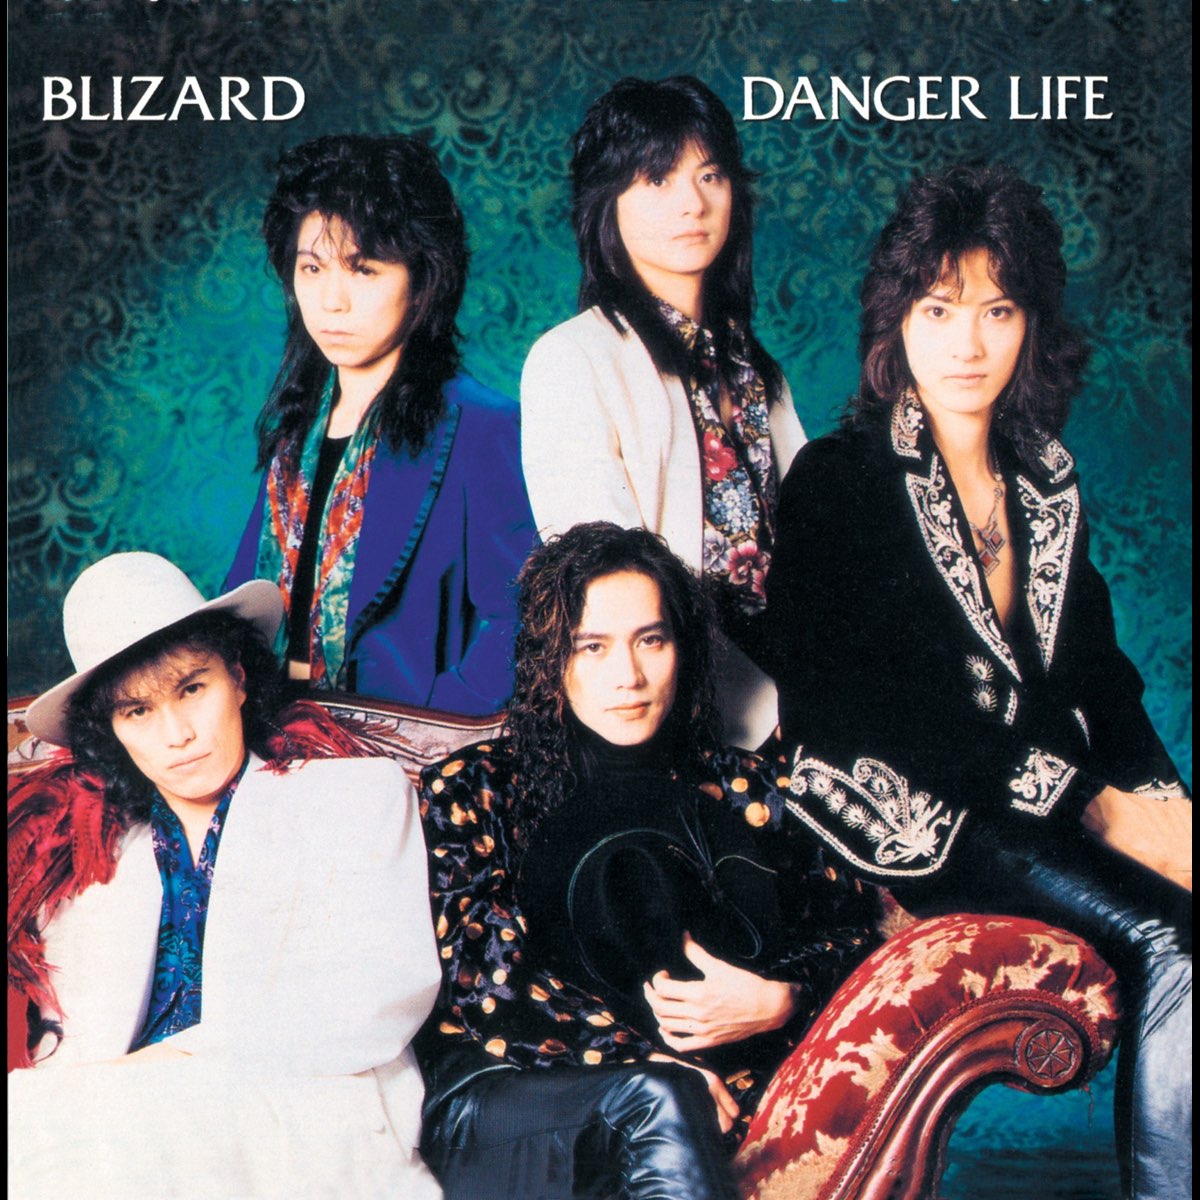 Danger to Life. Dangerous to Life. Life is Dangerous. Feeling Danger in Life. Feeling dangerous